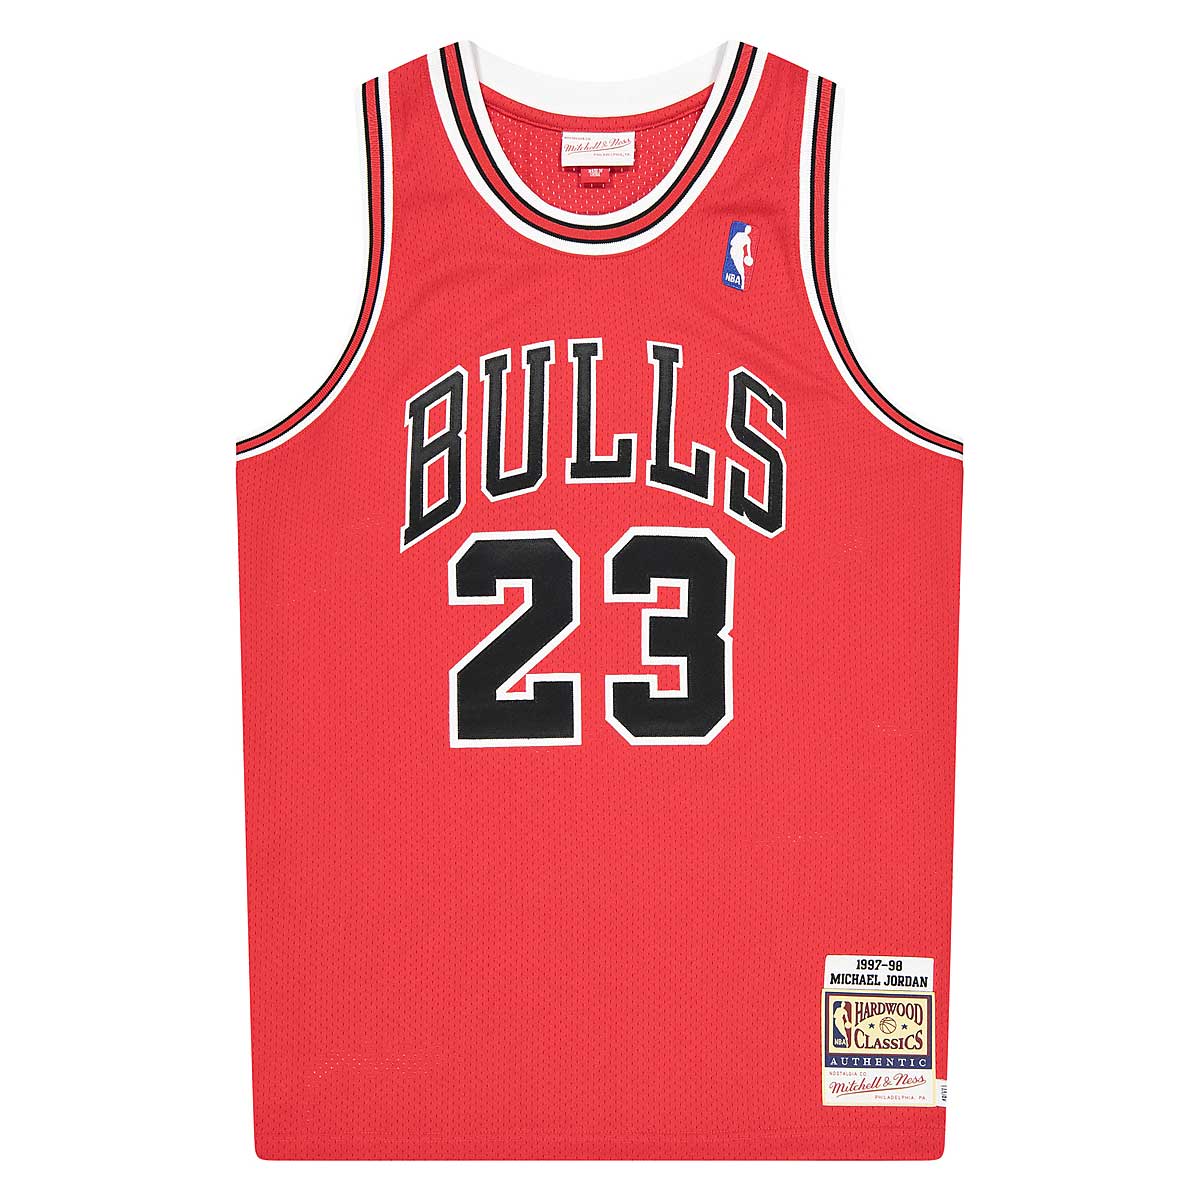 Mitchell And Ness Nba Authentic Jersey Chicago Bulls 97 - Michael Jordan, Red